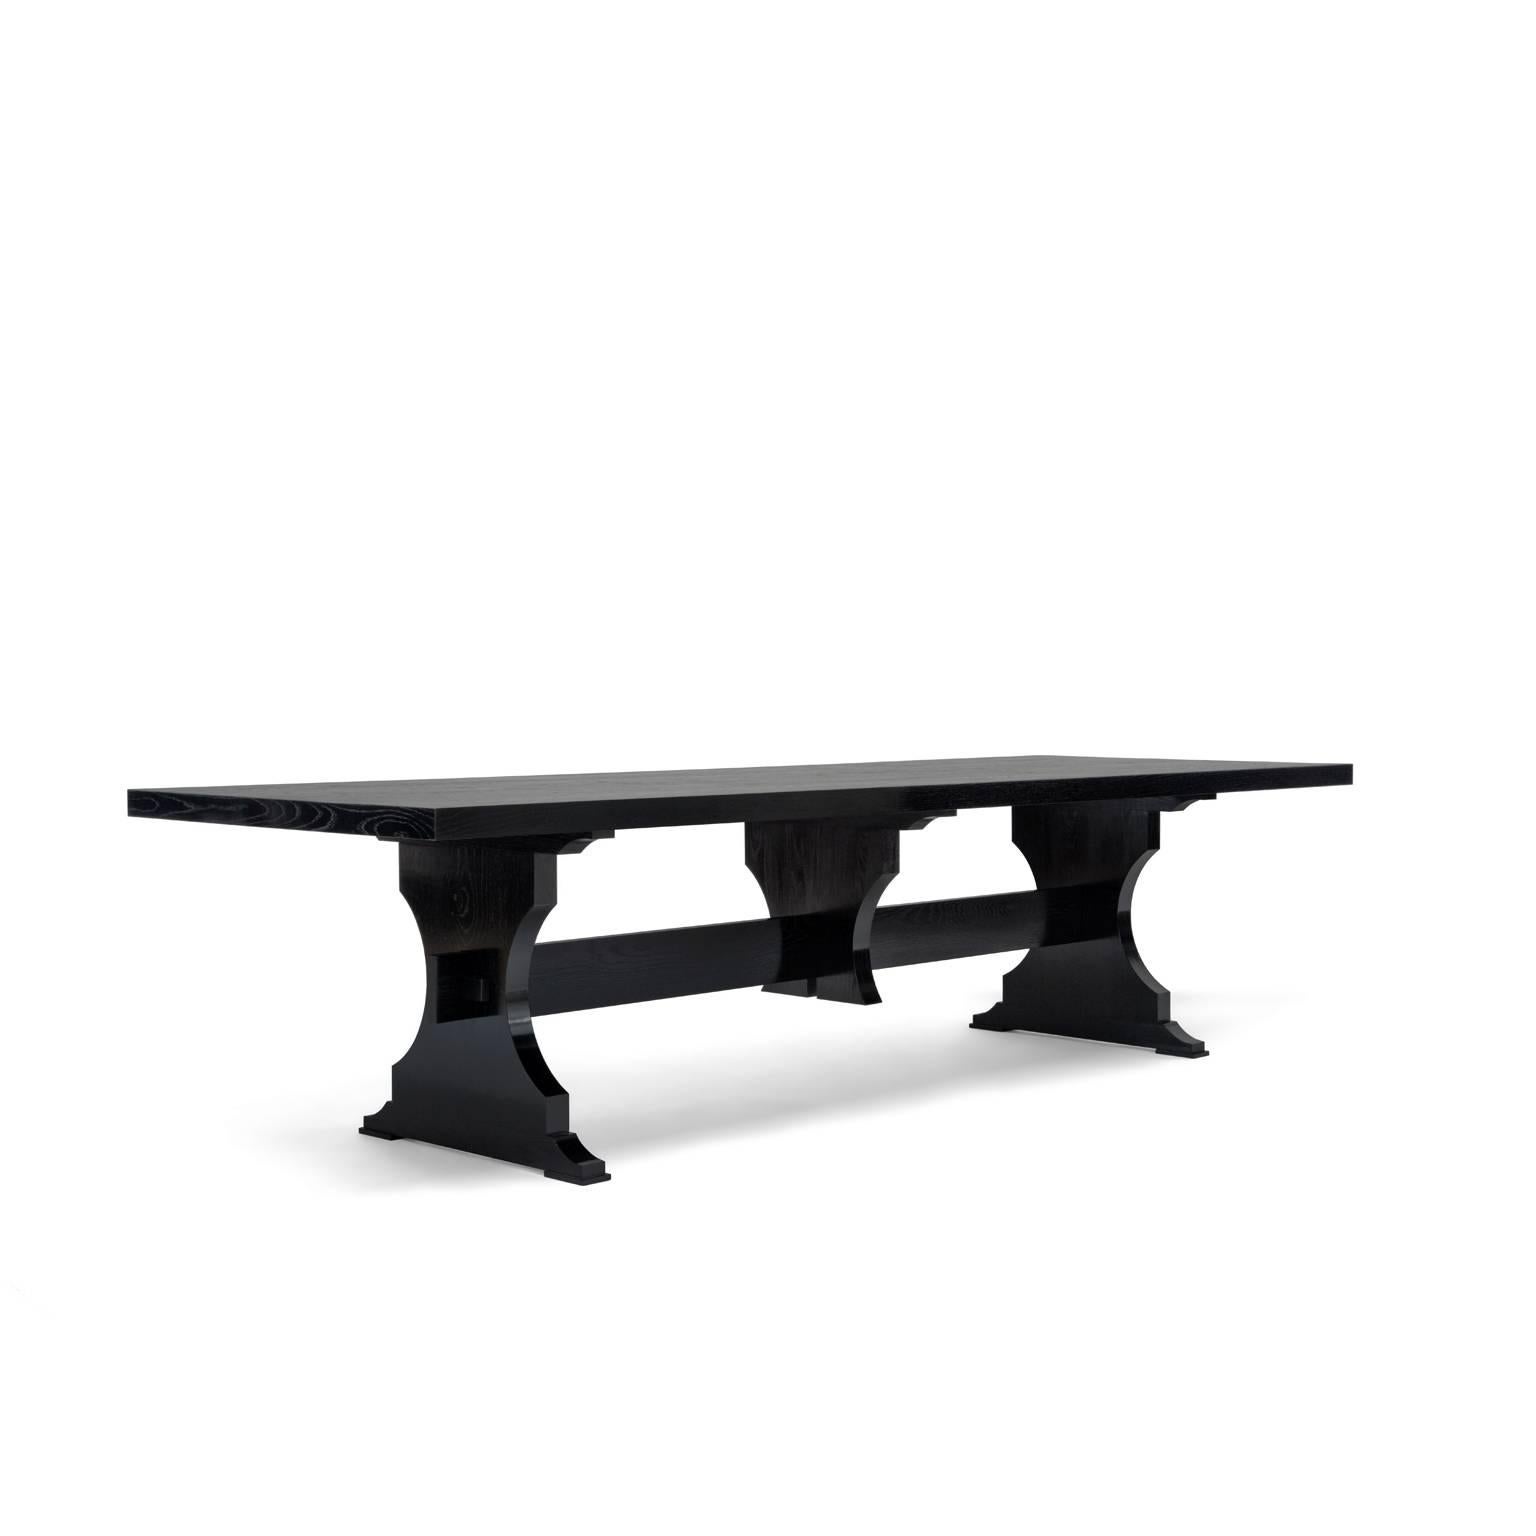 Atelier Demiurge Collection Tuscan Dining Table shown with an inset 19th c. oak top in ebonized finish. Inquire for finish and extension options.

Atelier Demiurge Collection pieces are made to order, and custom sizes are available. Please contact